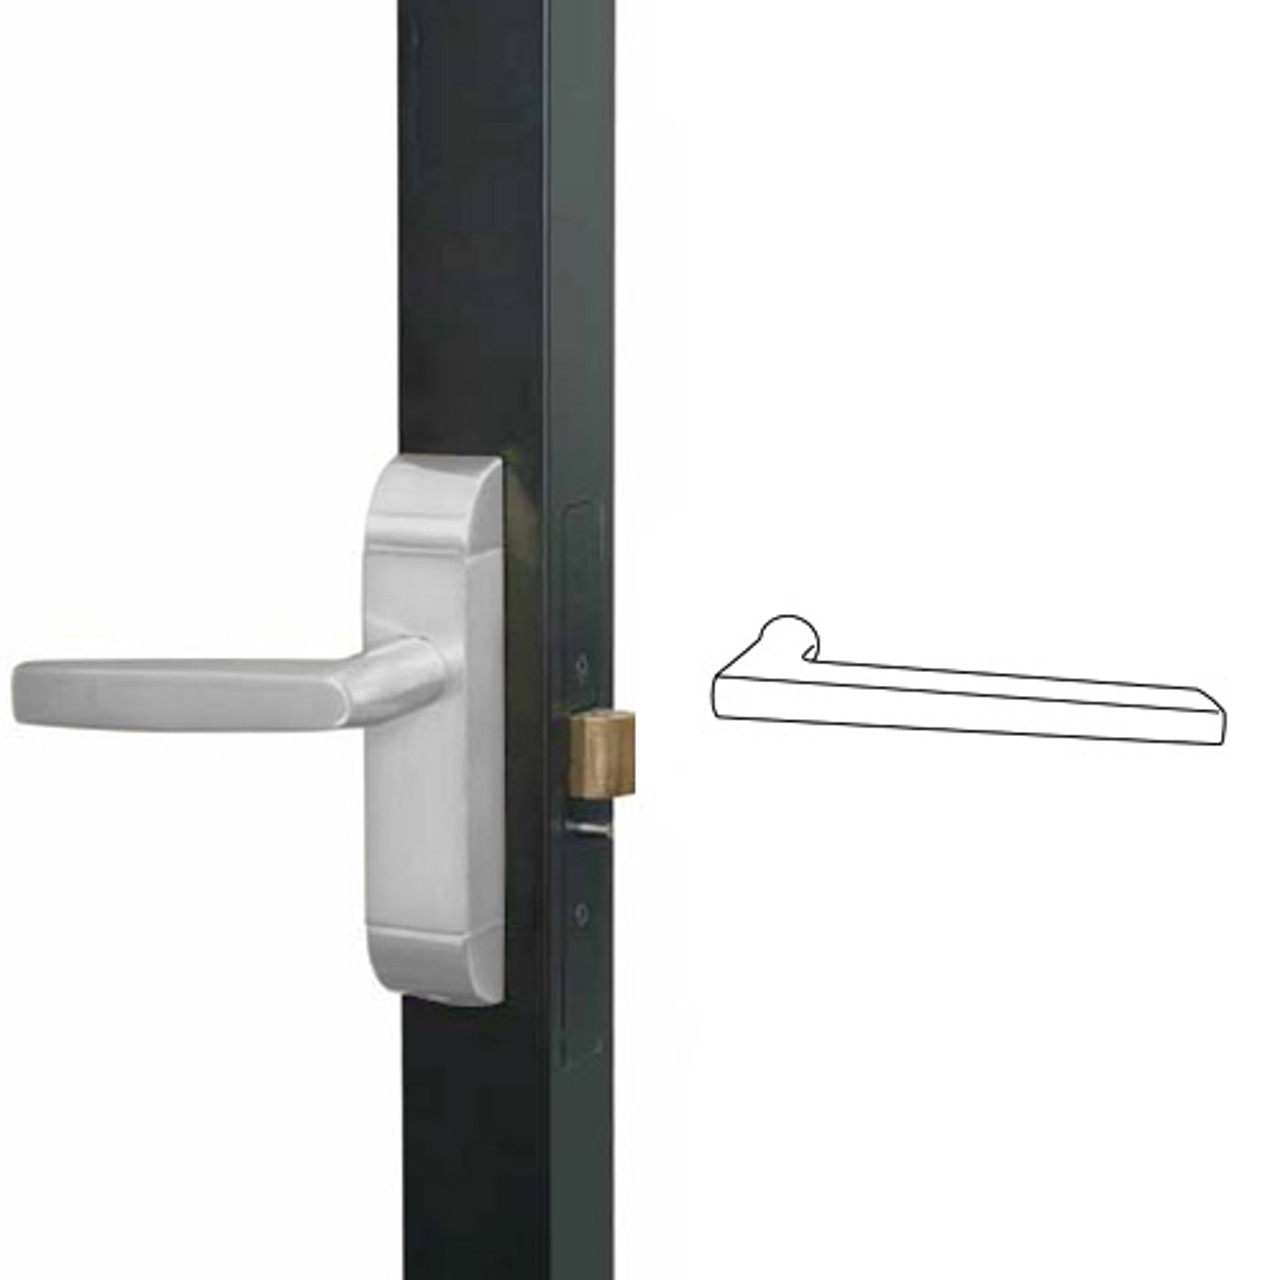 4600M-MD-641-US32 Adams Rite MD Designer Deadlatch handle in Bright Stainless Finish